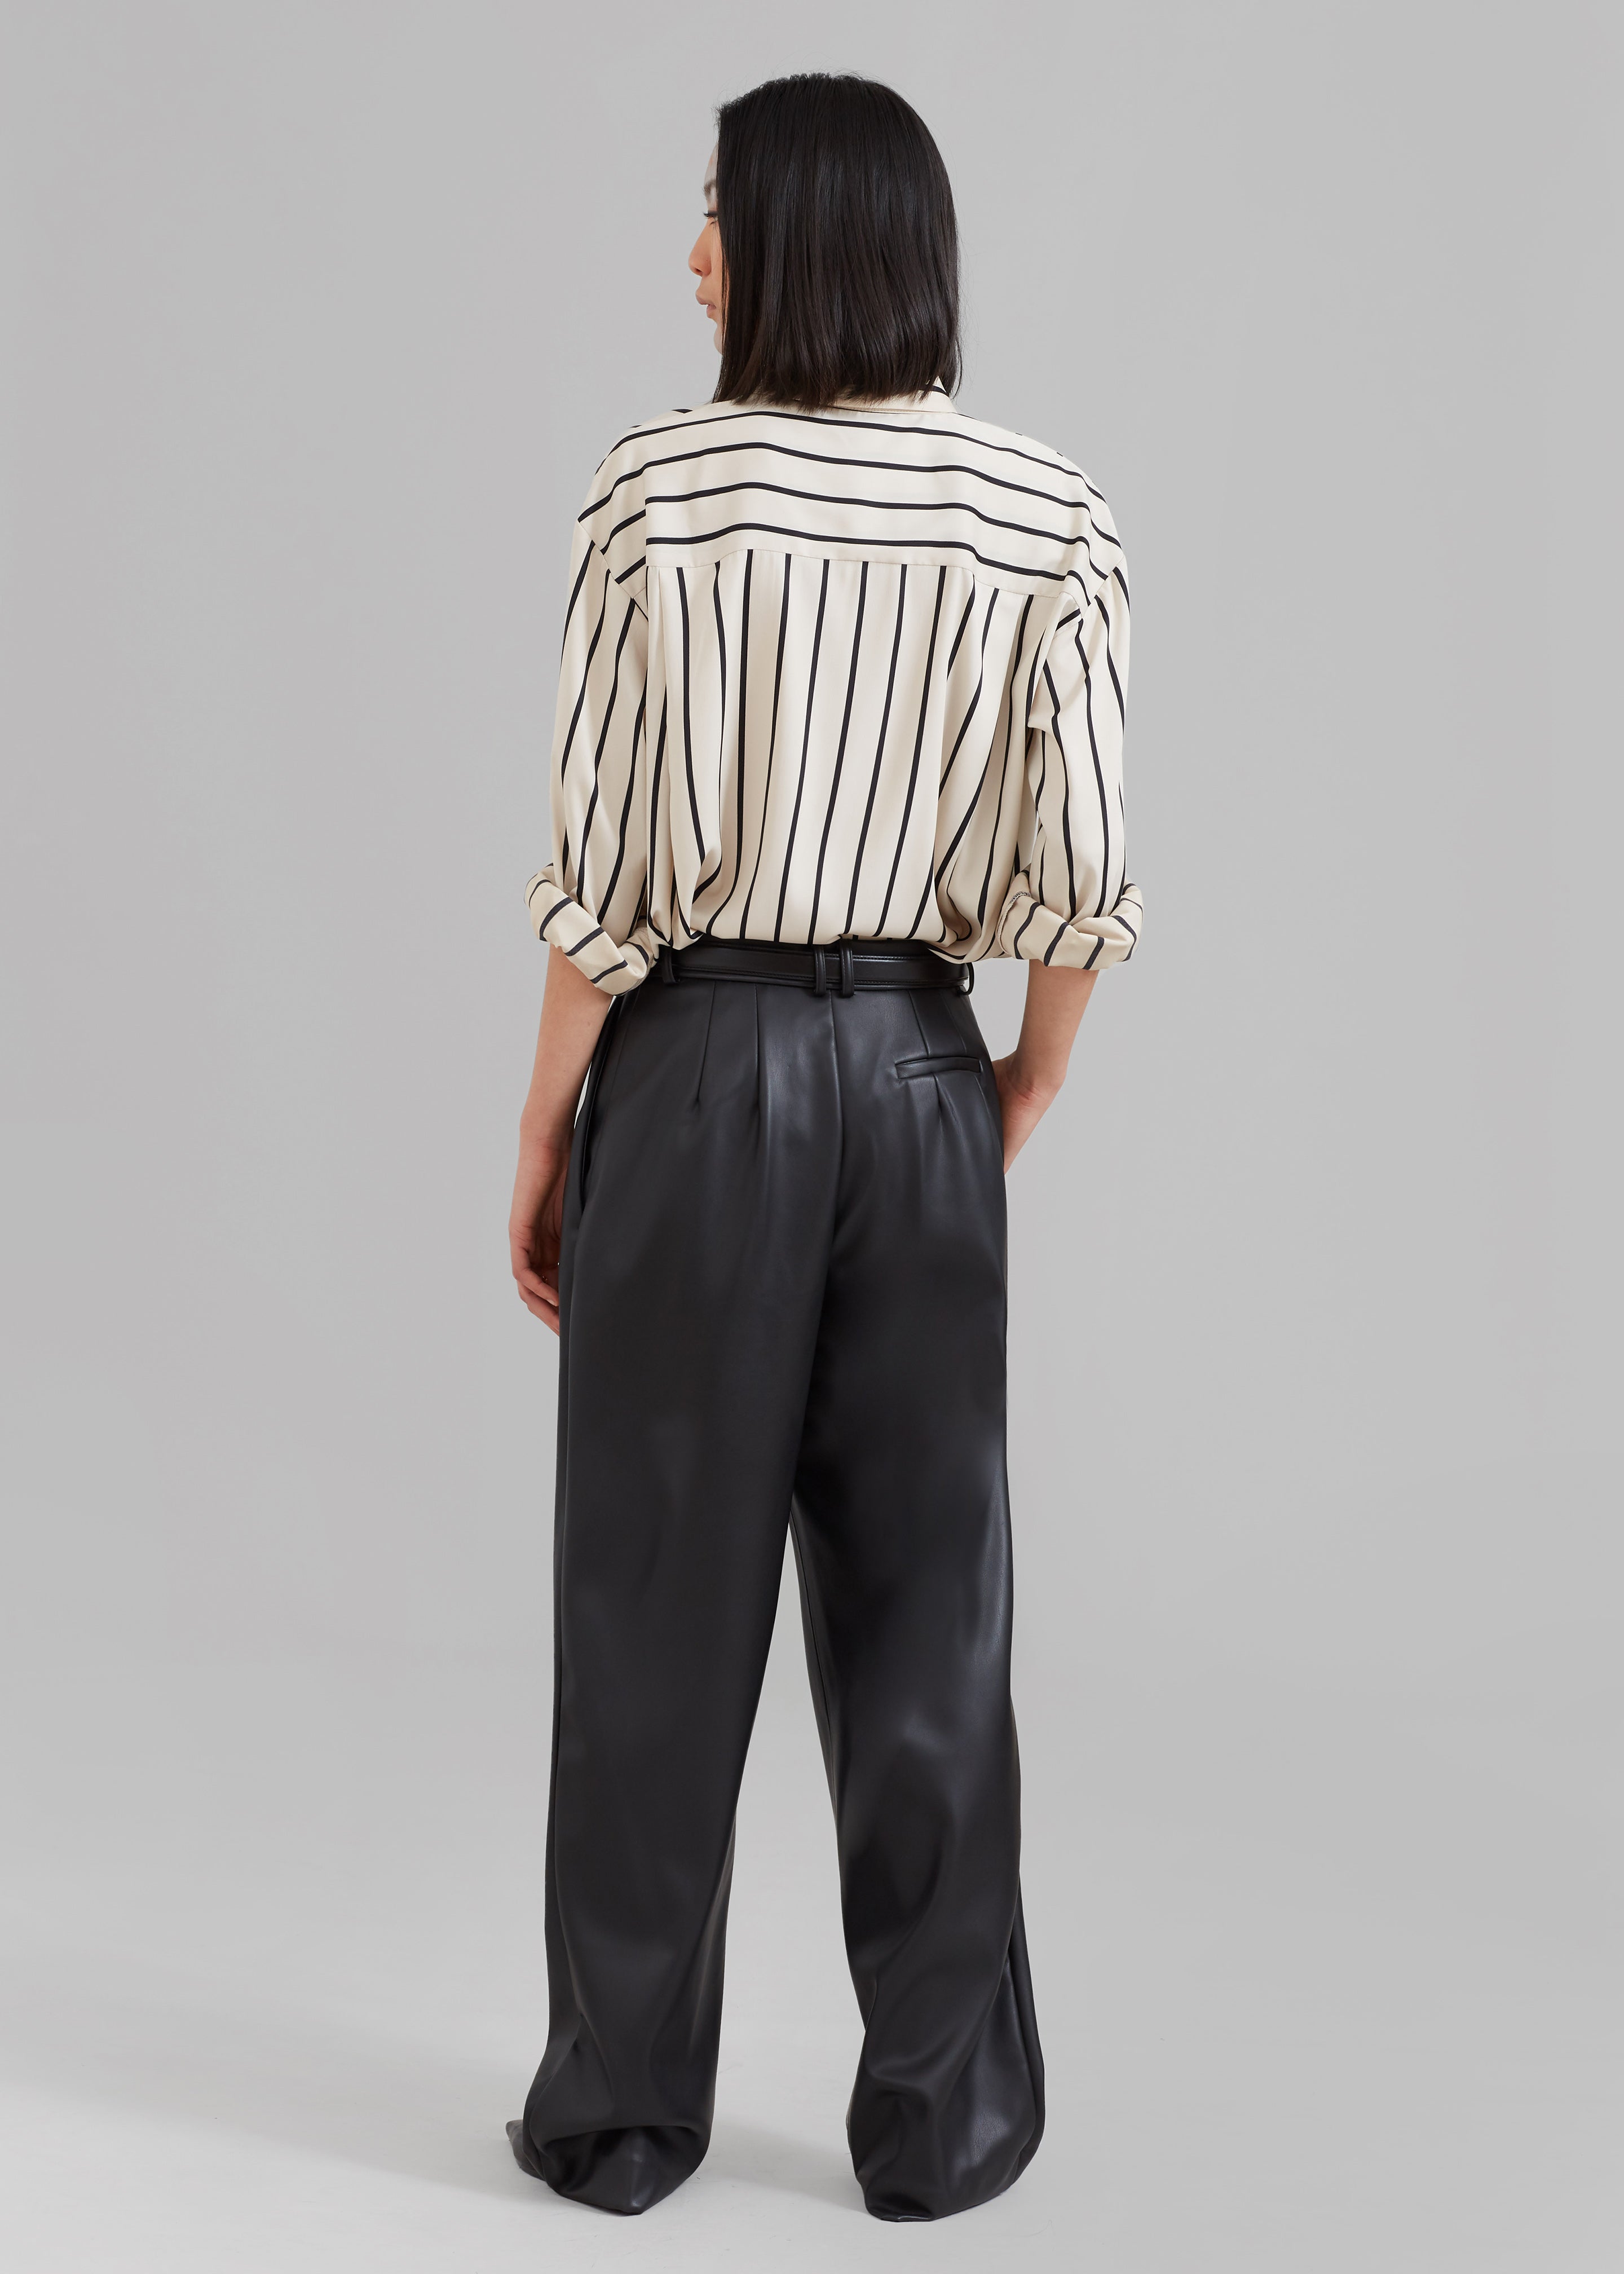 Walter Baker Maggie Leather Pant in Walnut – clever alice